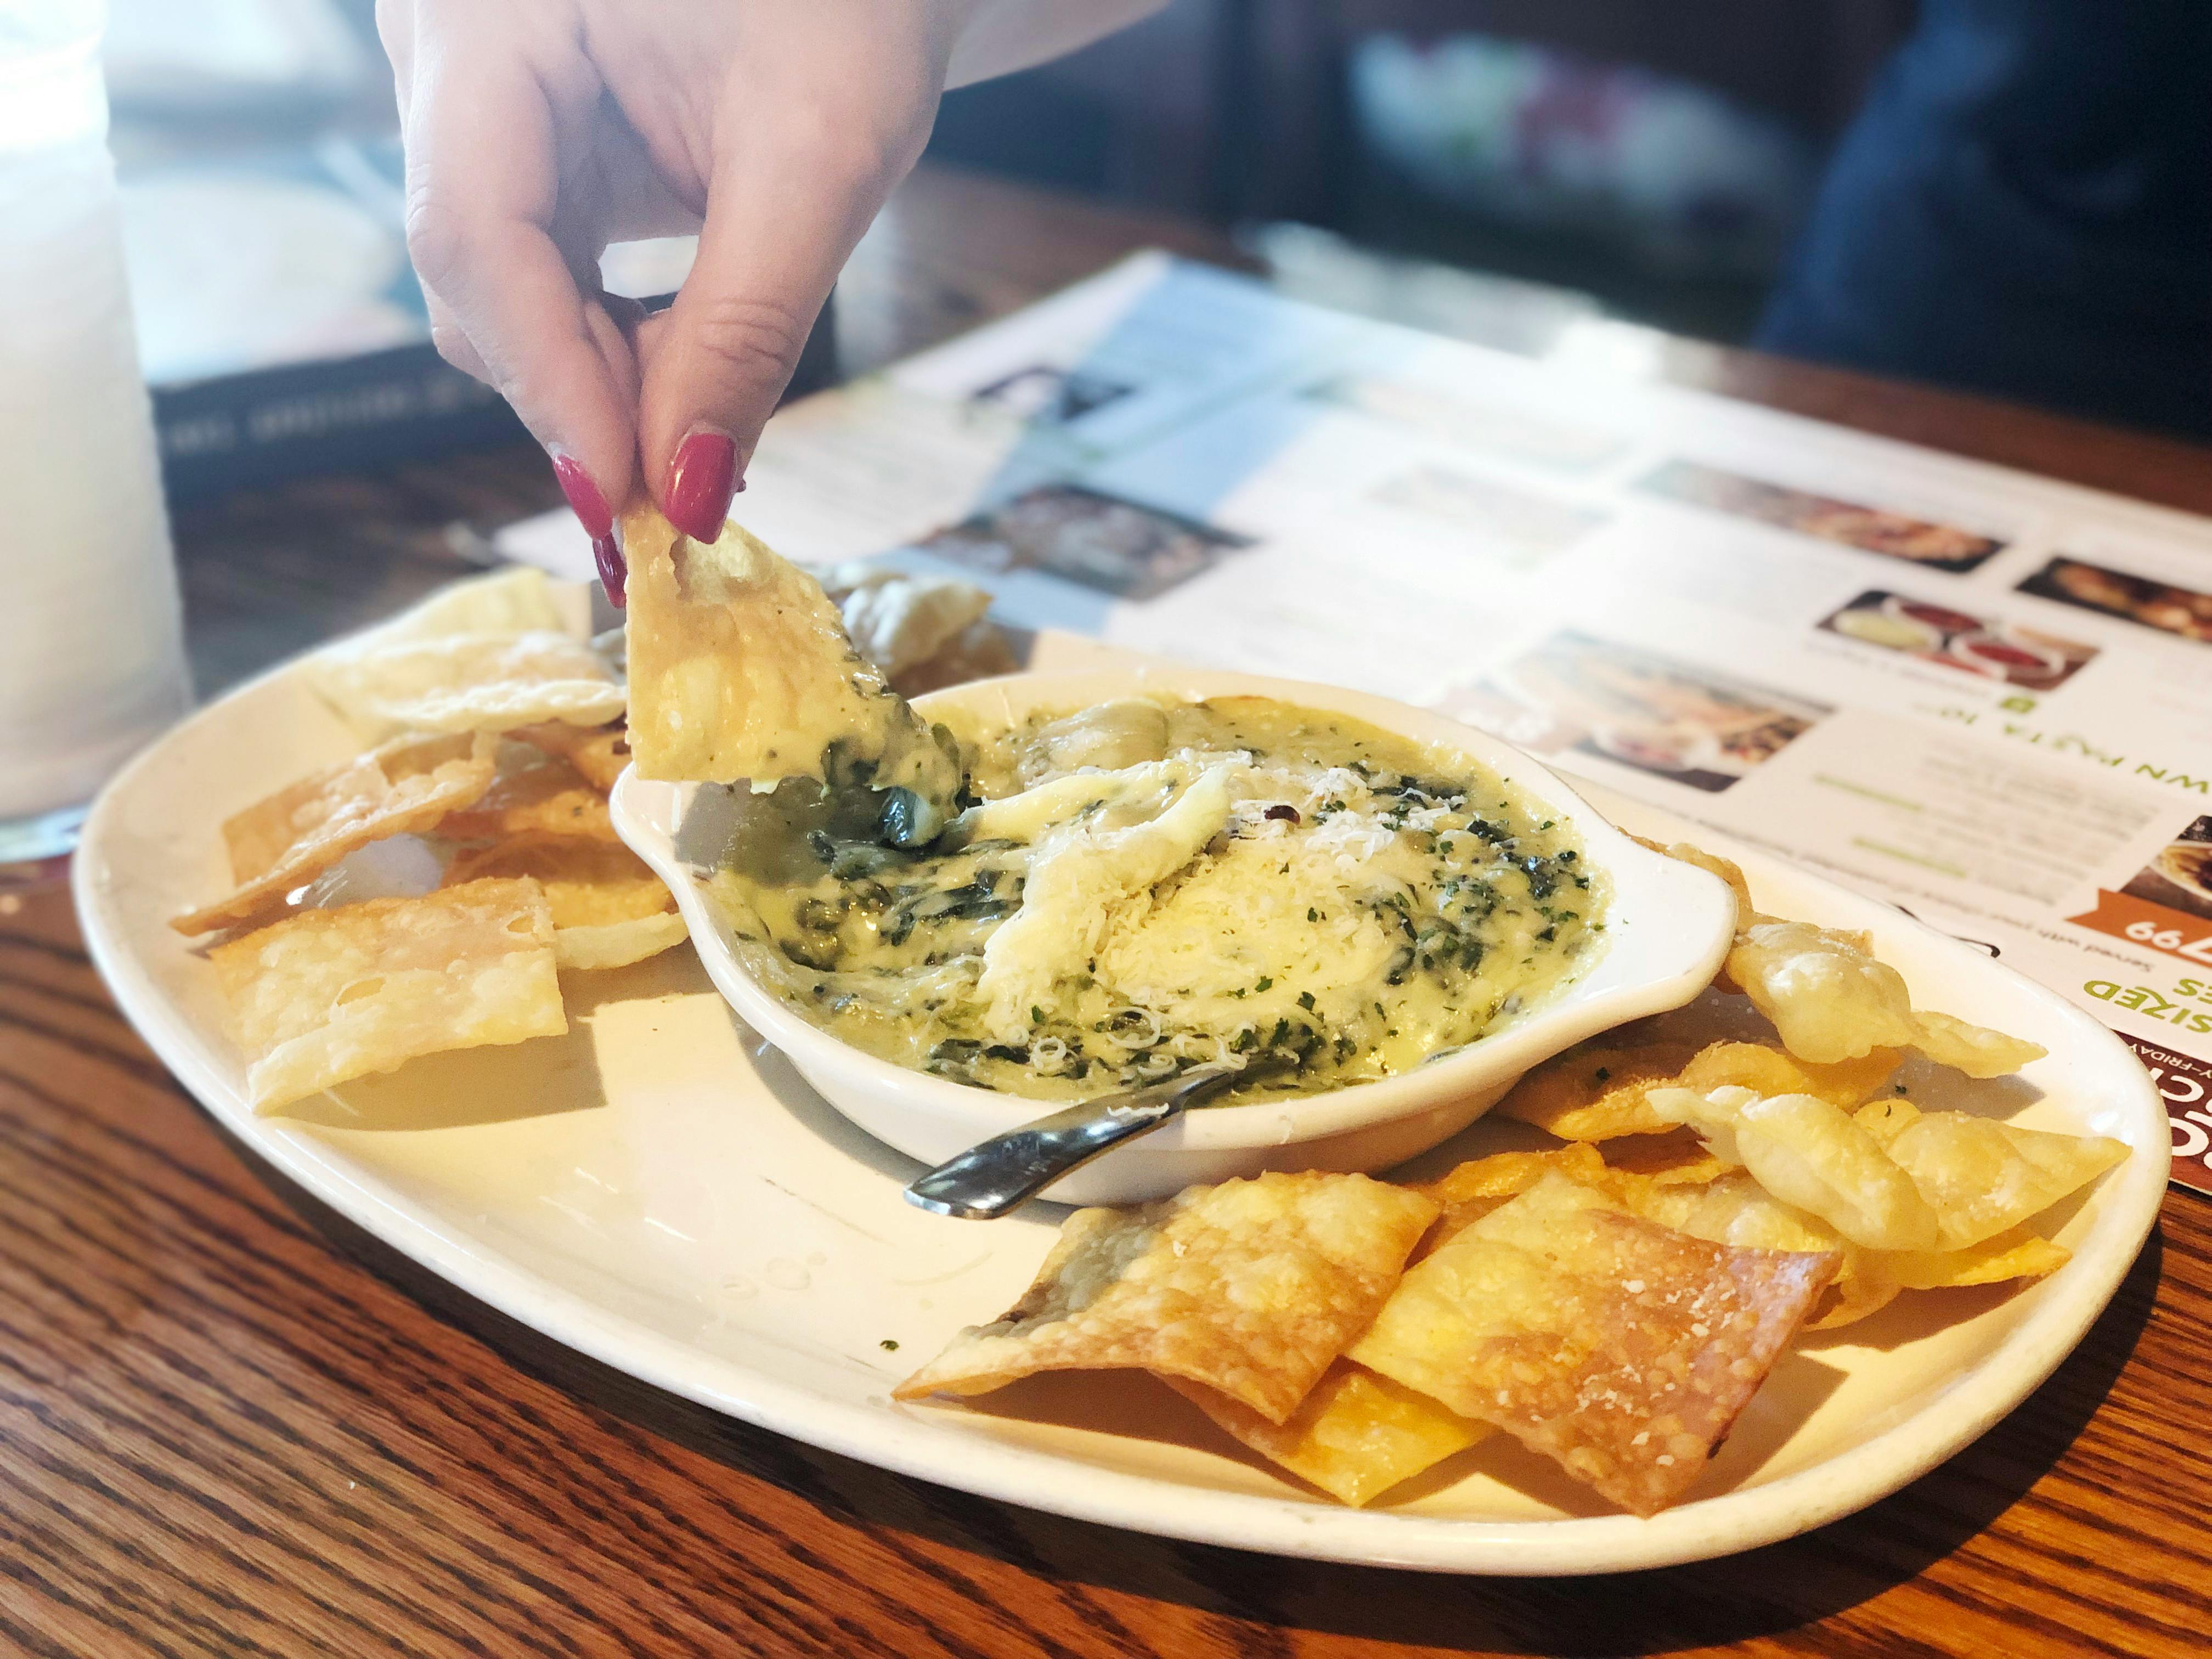 25 Olive Garden Secrets From Your Server That Ll Save You Serious Cash The Krazy Coupon Lady